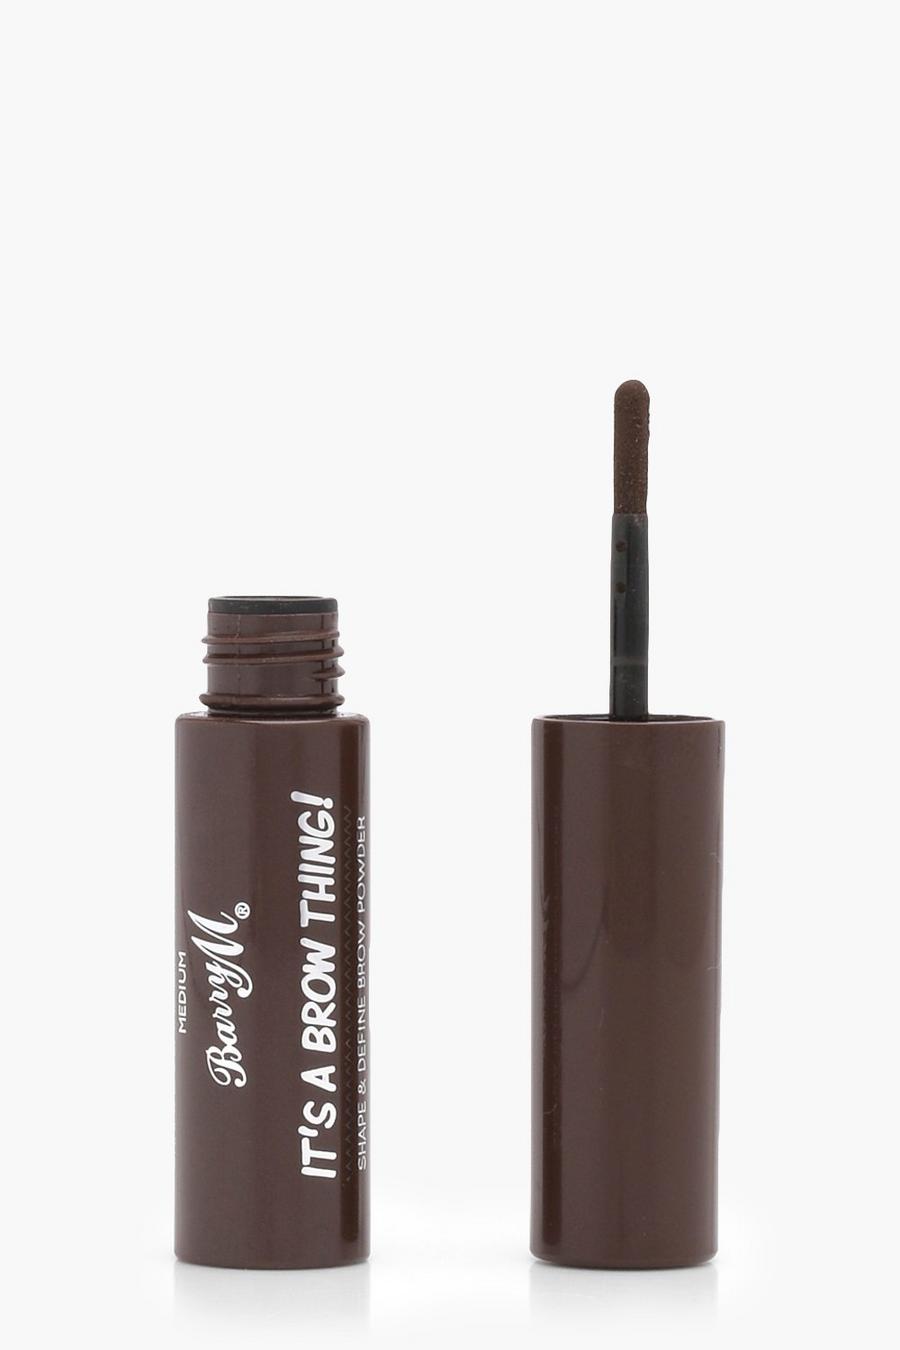 Middenbruin Barry M It's A Brow Thing Powder- Medium image number 1